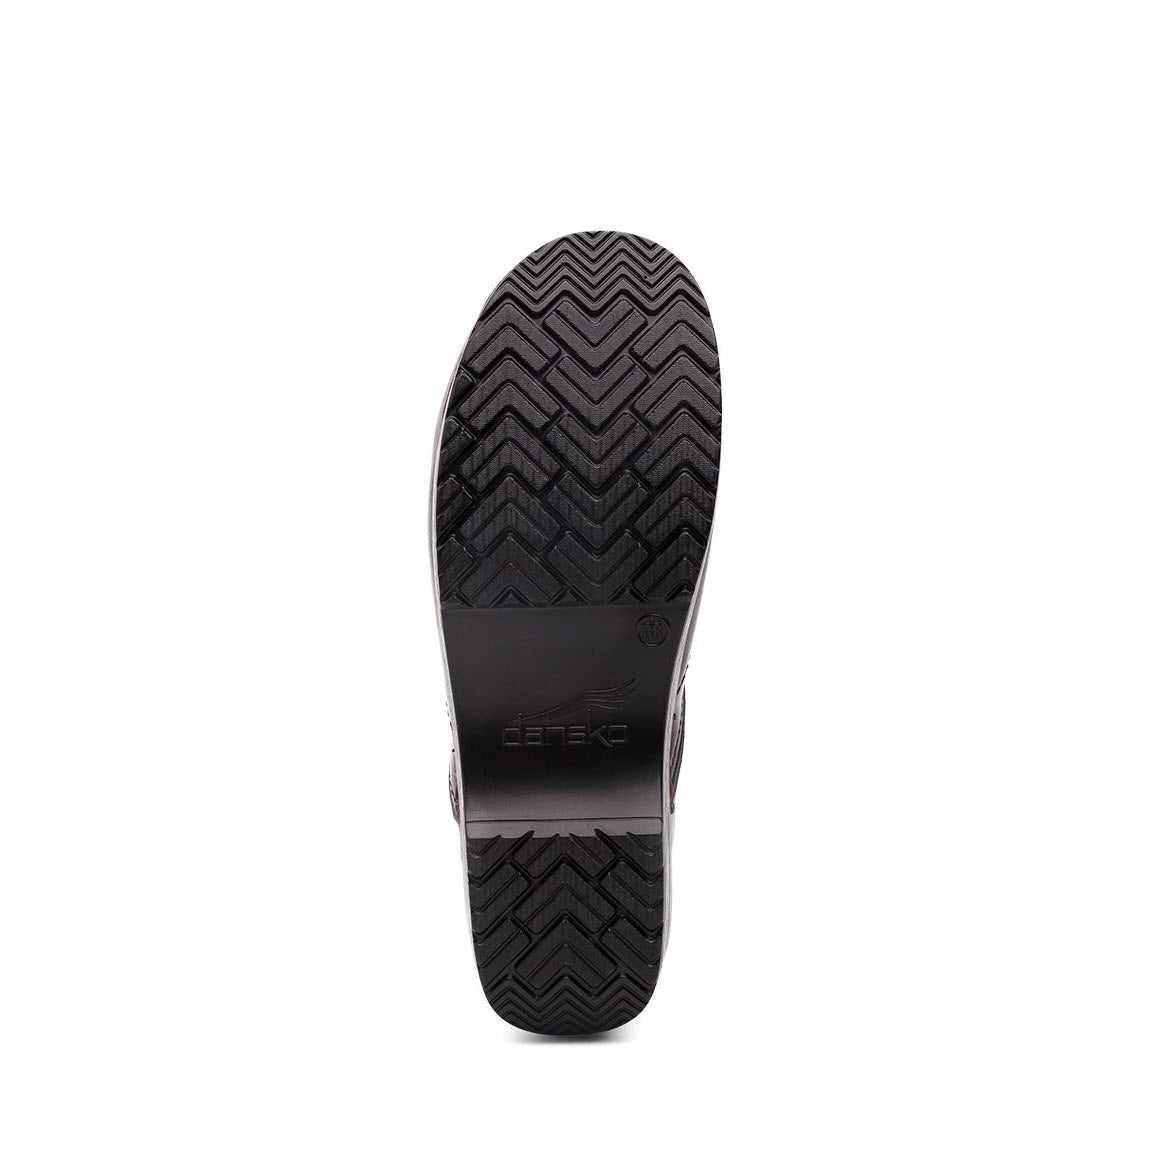 Bottom view of a black Dansko Professional Cordovan Cabrio shoe with an anti-fatigue rocker bottom and a visible brand logo.